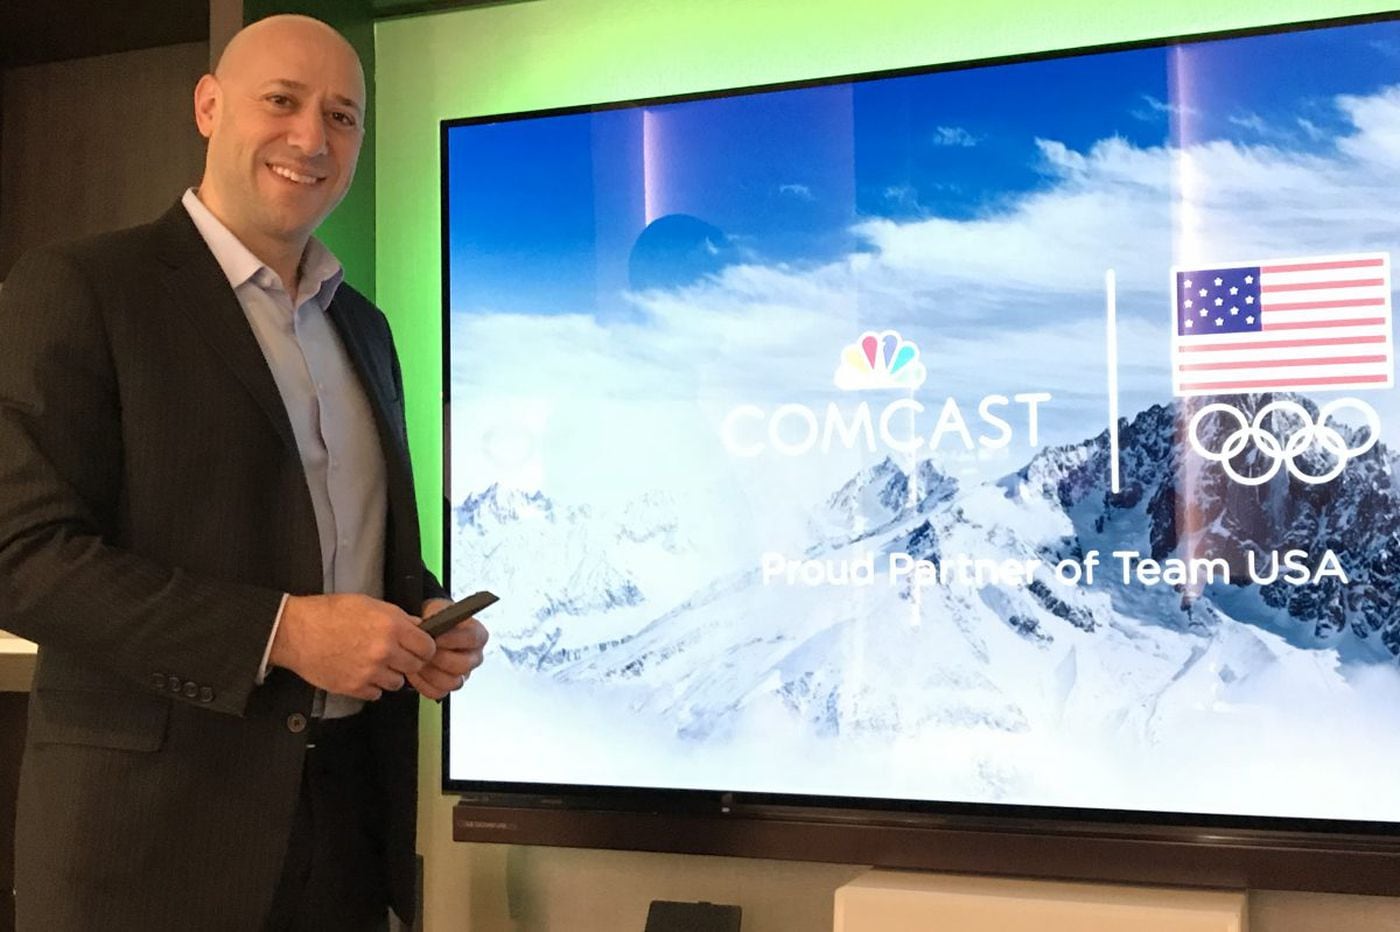 Comcast unveils the start of personalized television for